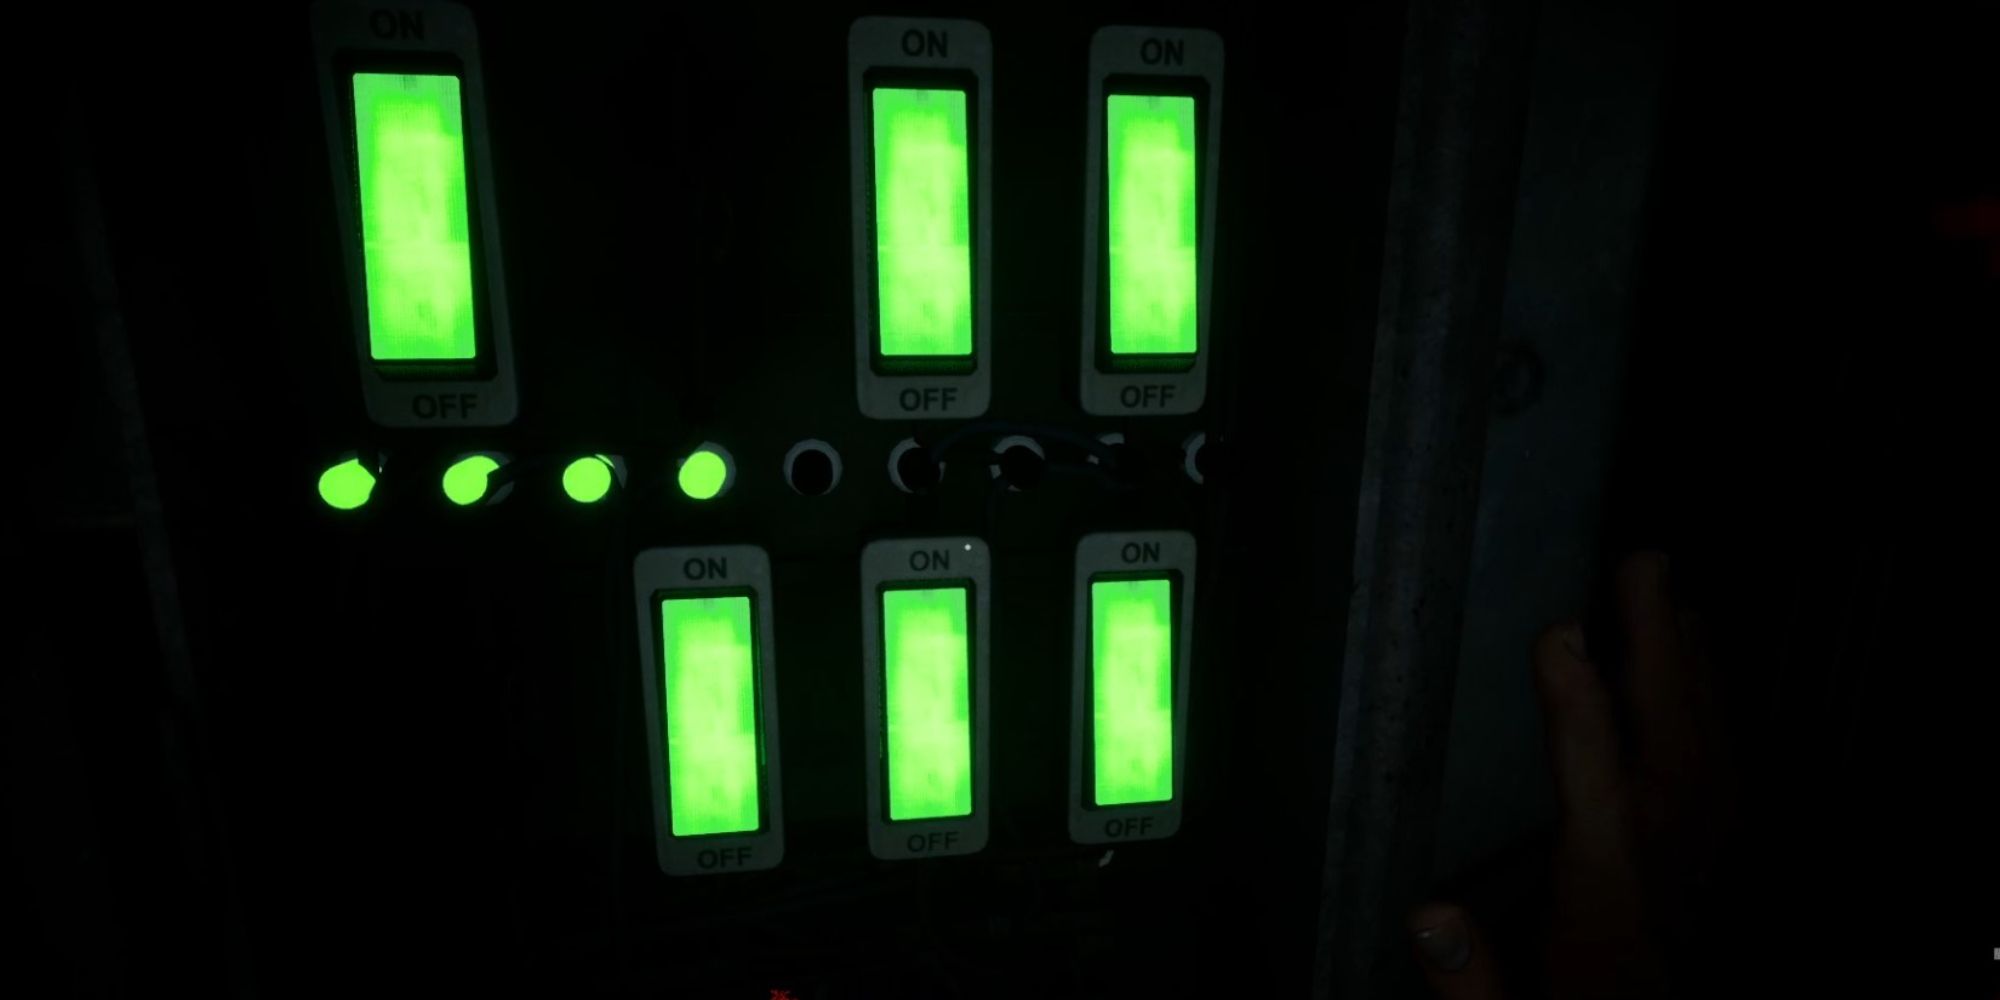 Outlast Trials generator buttons are all green